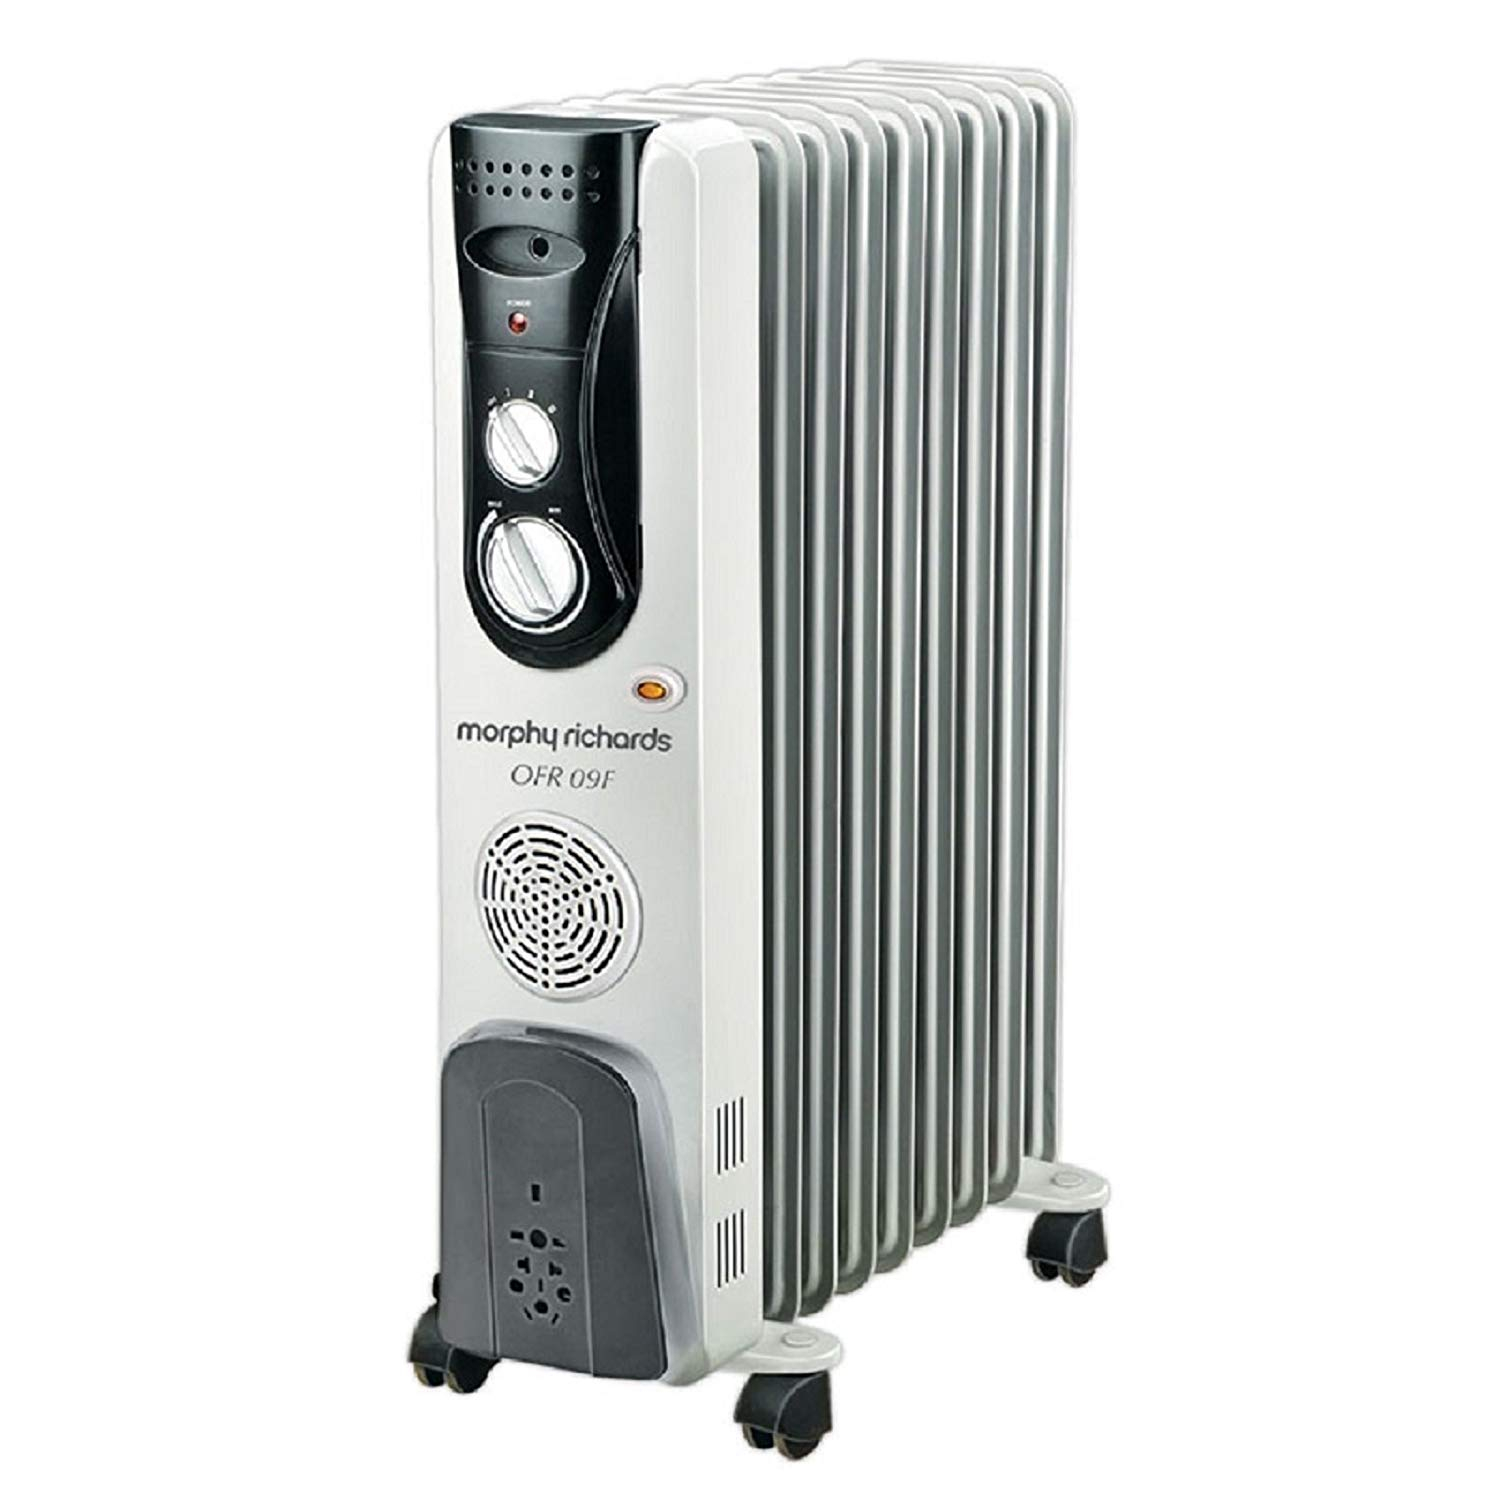 Morphy Richards Ofr 9f 9 Fin 2400 Watt Oil Filled Radiator With Ptc Fan Heater Grey intended for proportions 1500 X 1500